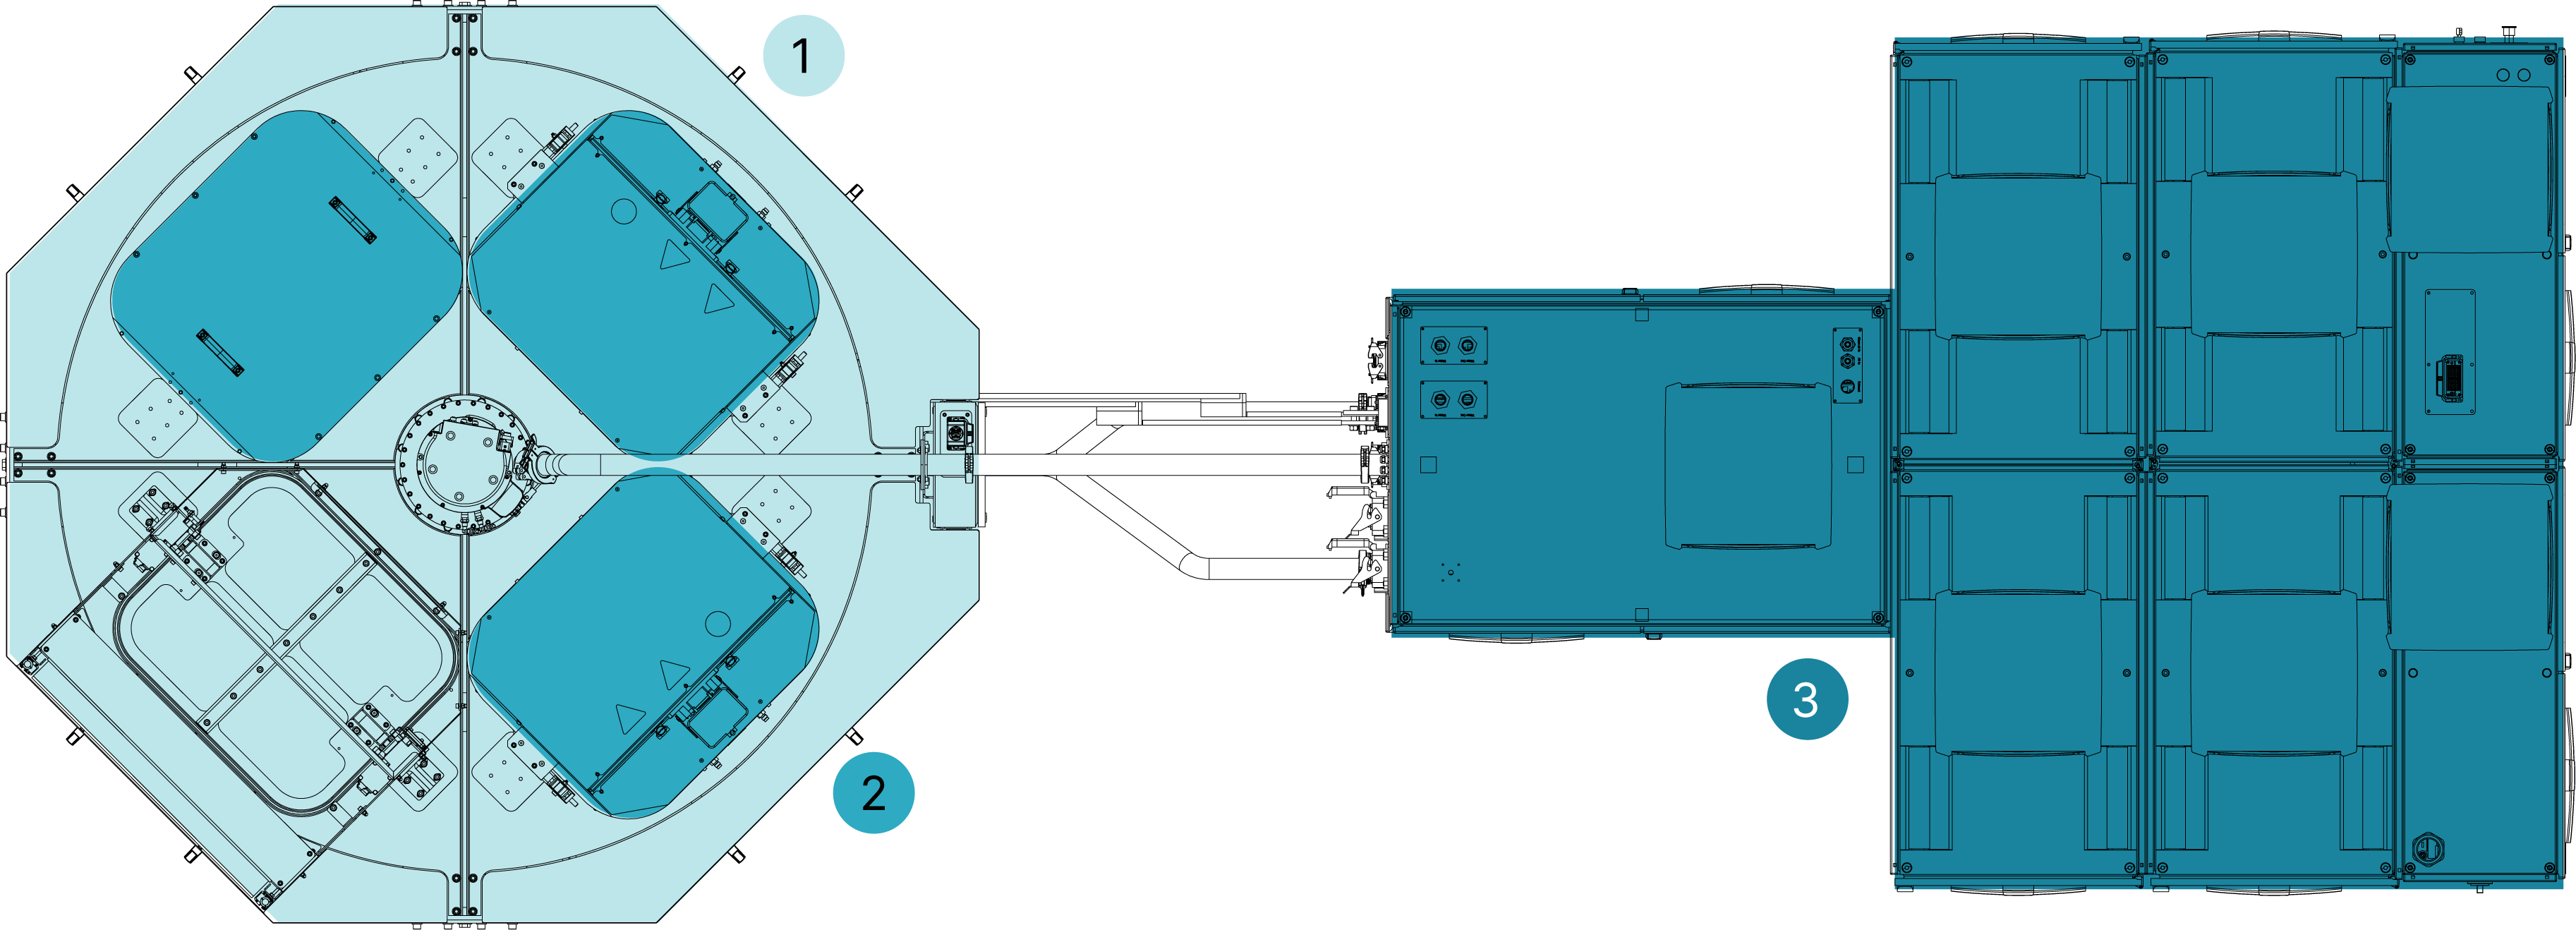 Technical drawing showing the top view of an INLINECOATER and the different modular machine parts